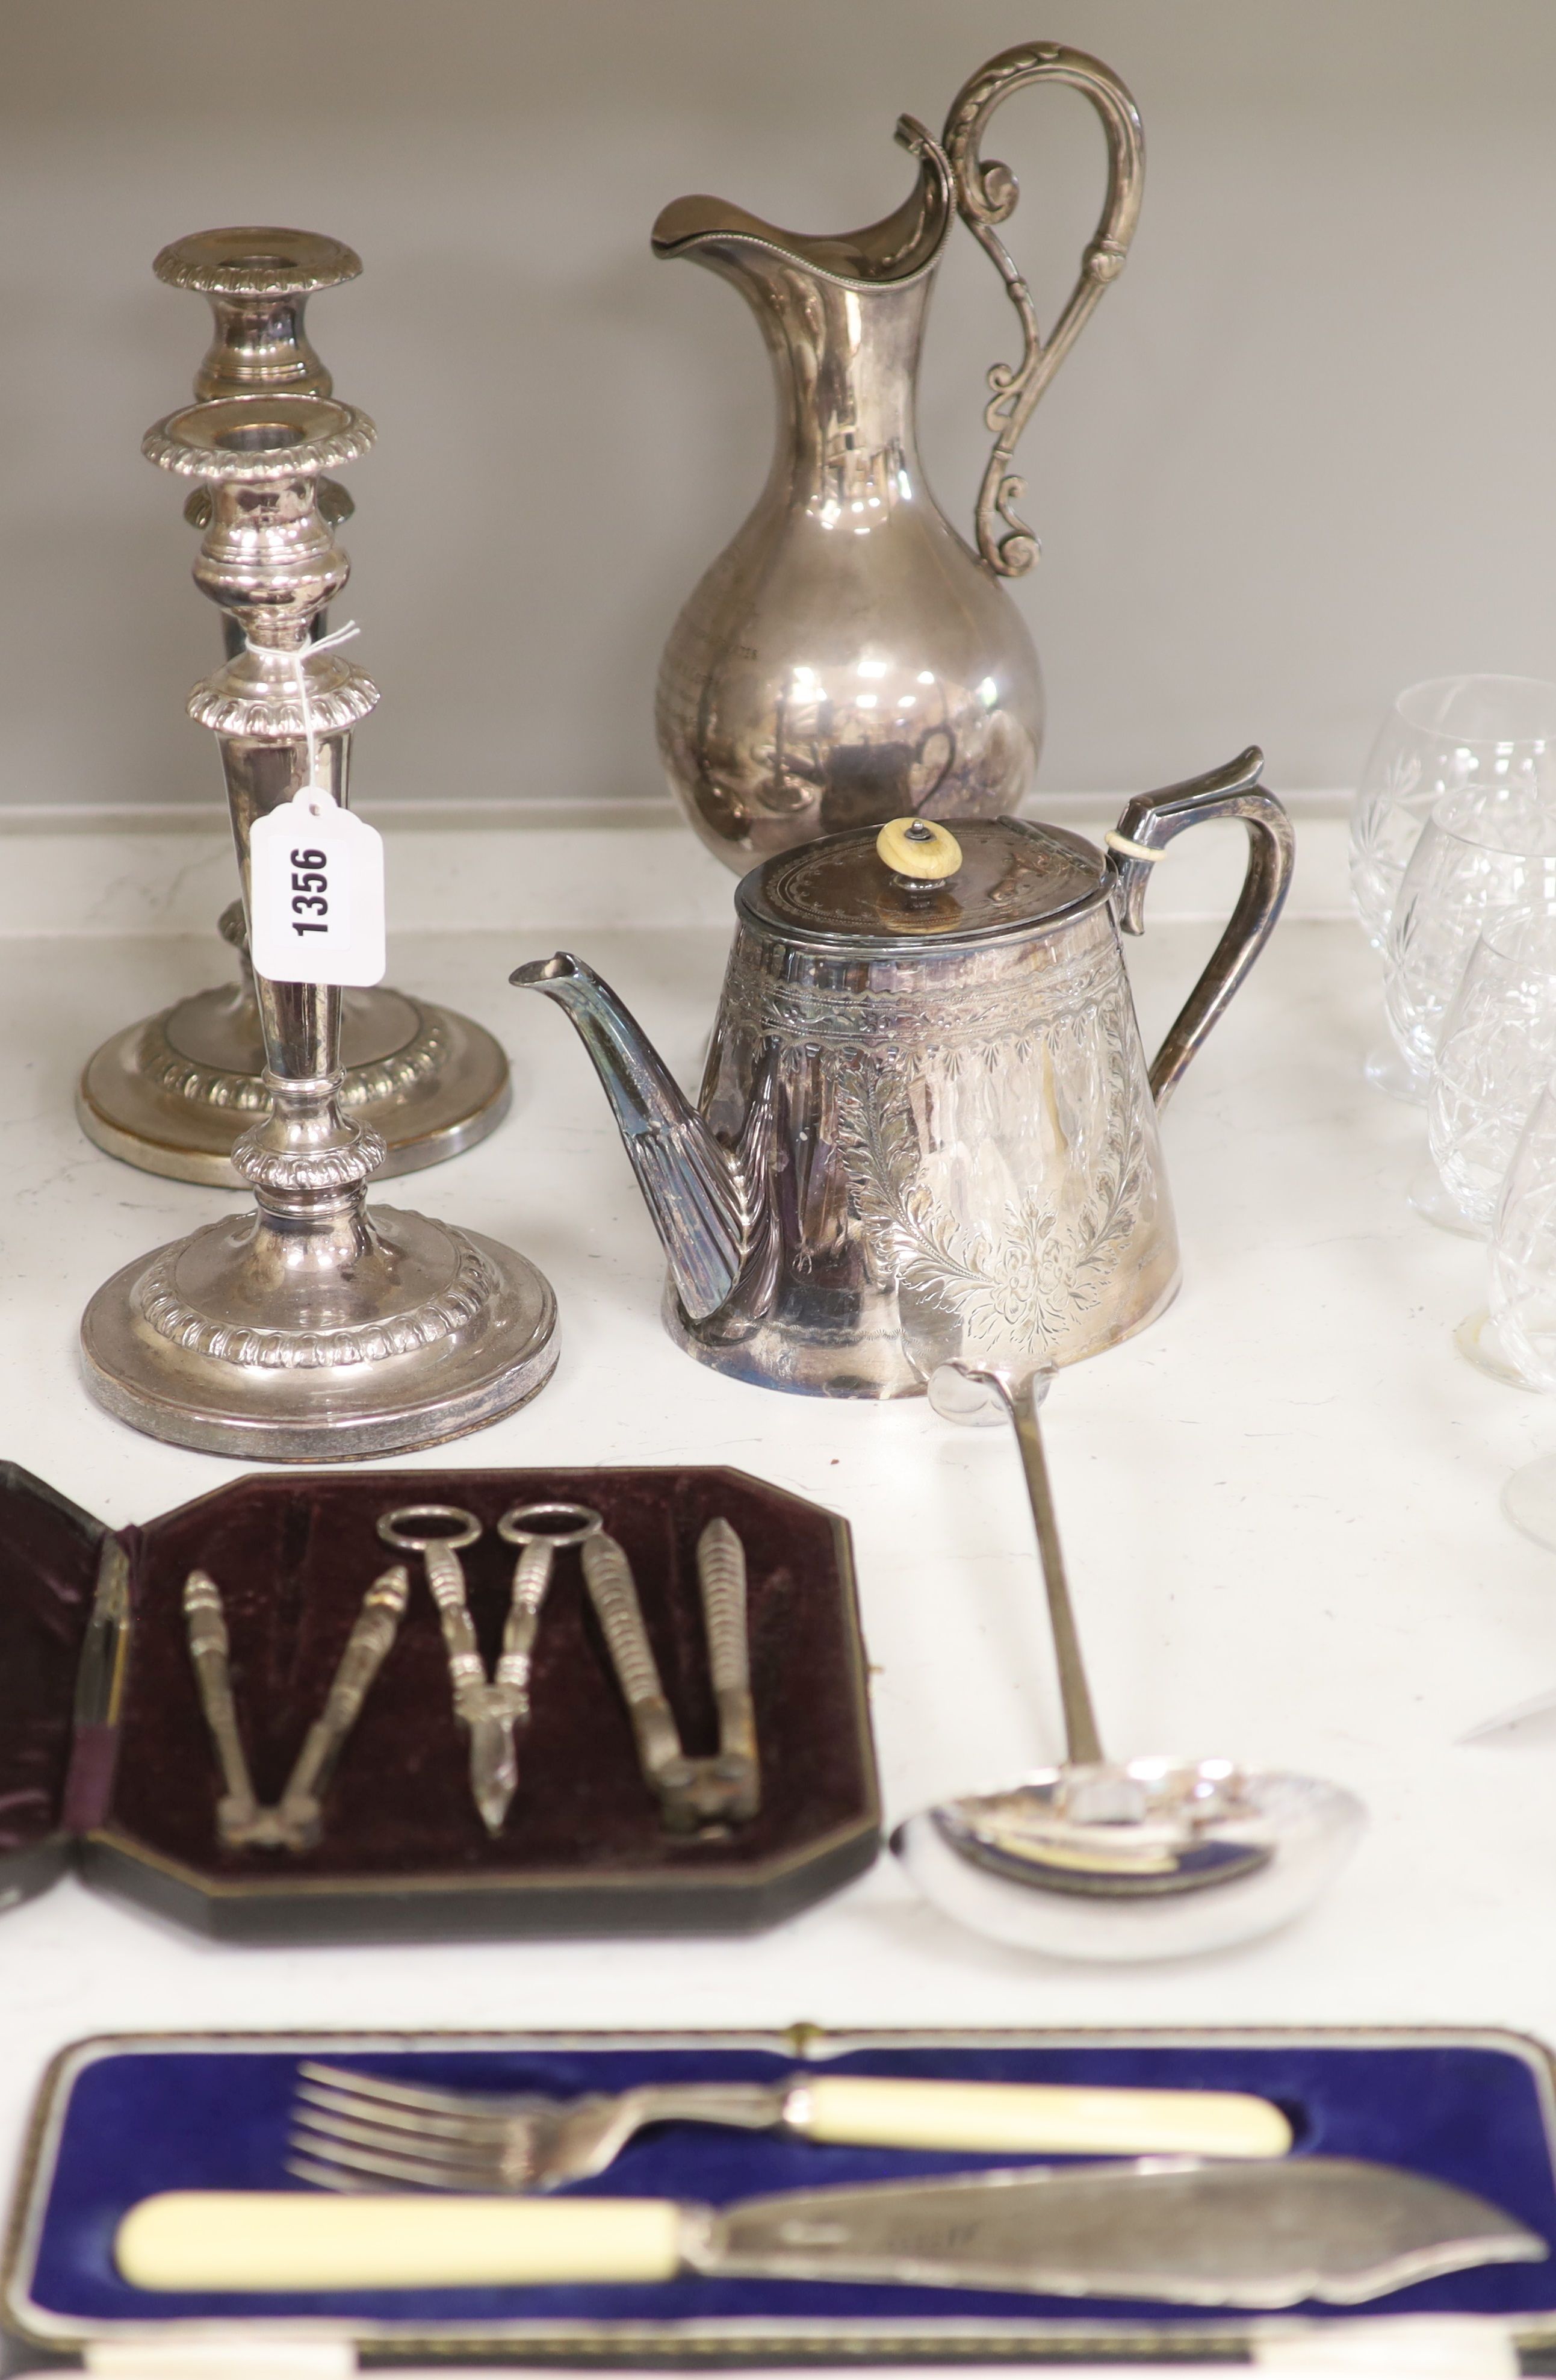 A pair of plated candlesticks, a wine ewer, height 33cm (dented), teapot, ladle, cased nutcrackers